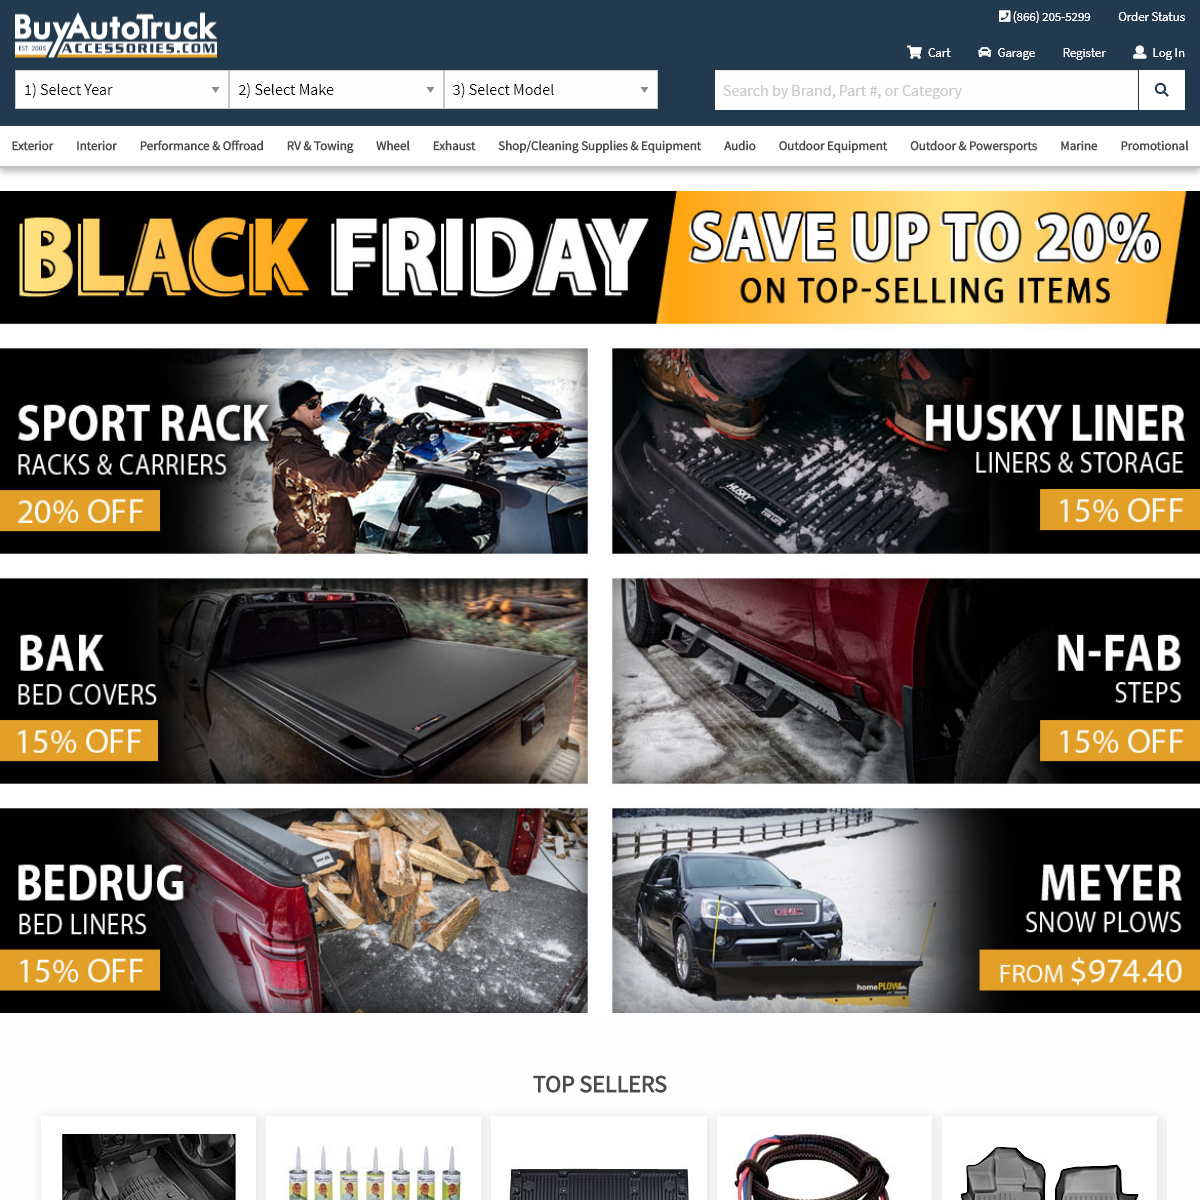 A complete backup of buyautotruckaccessories.com